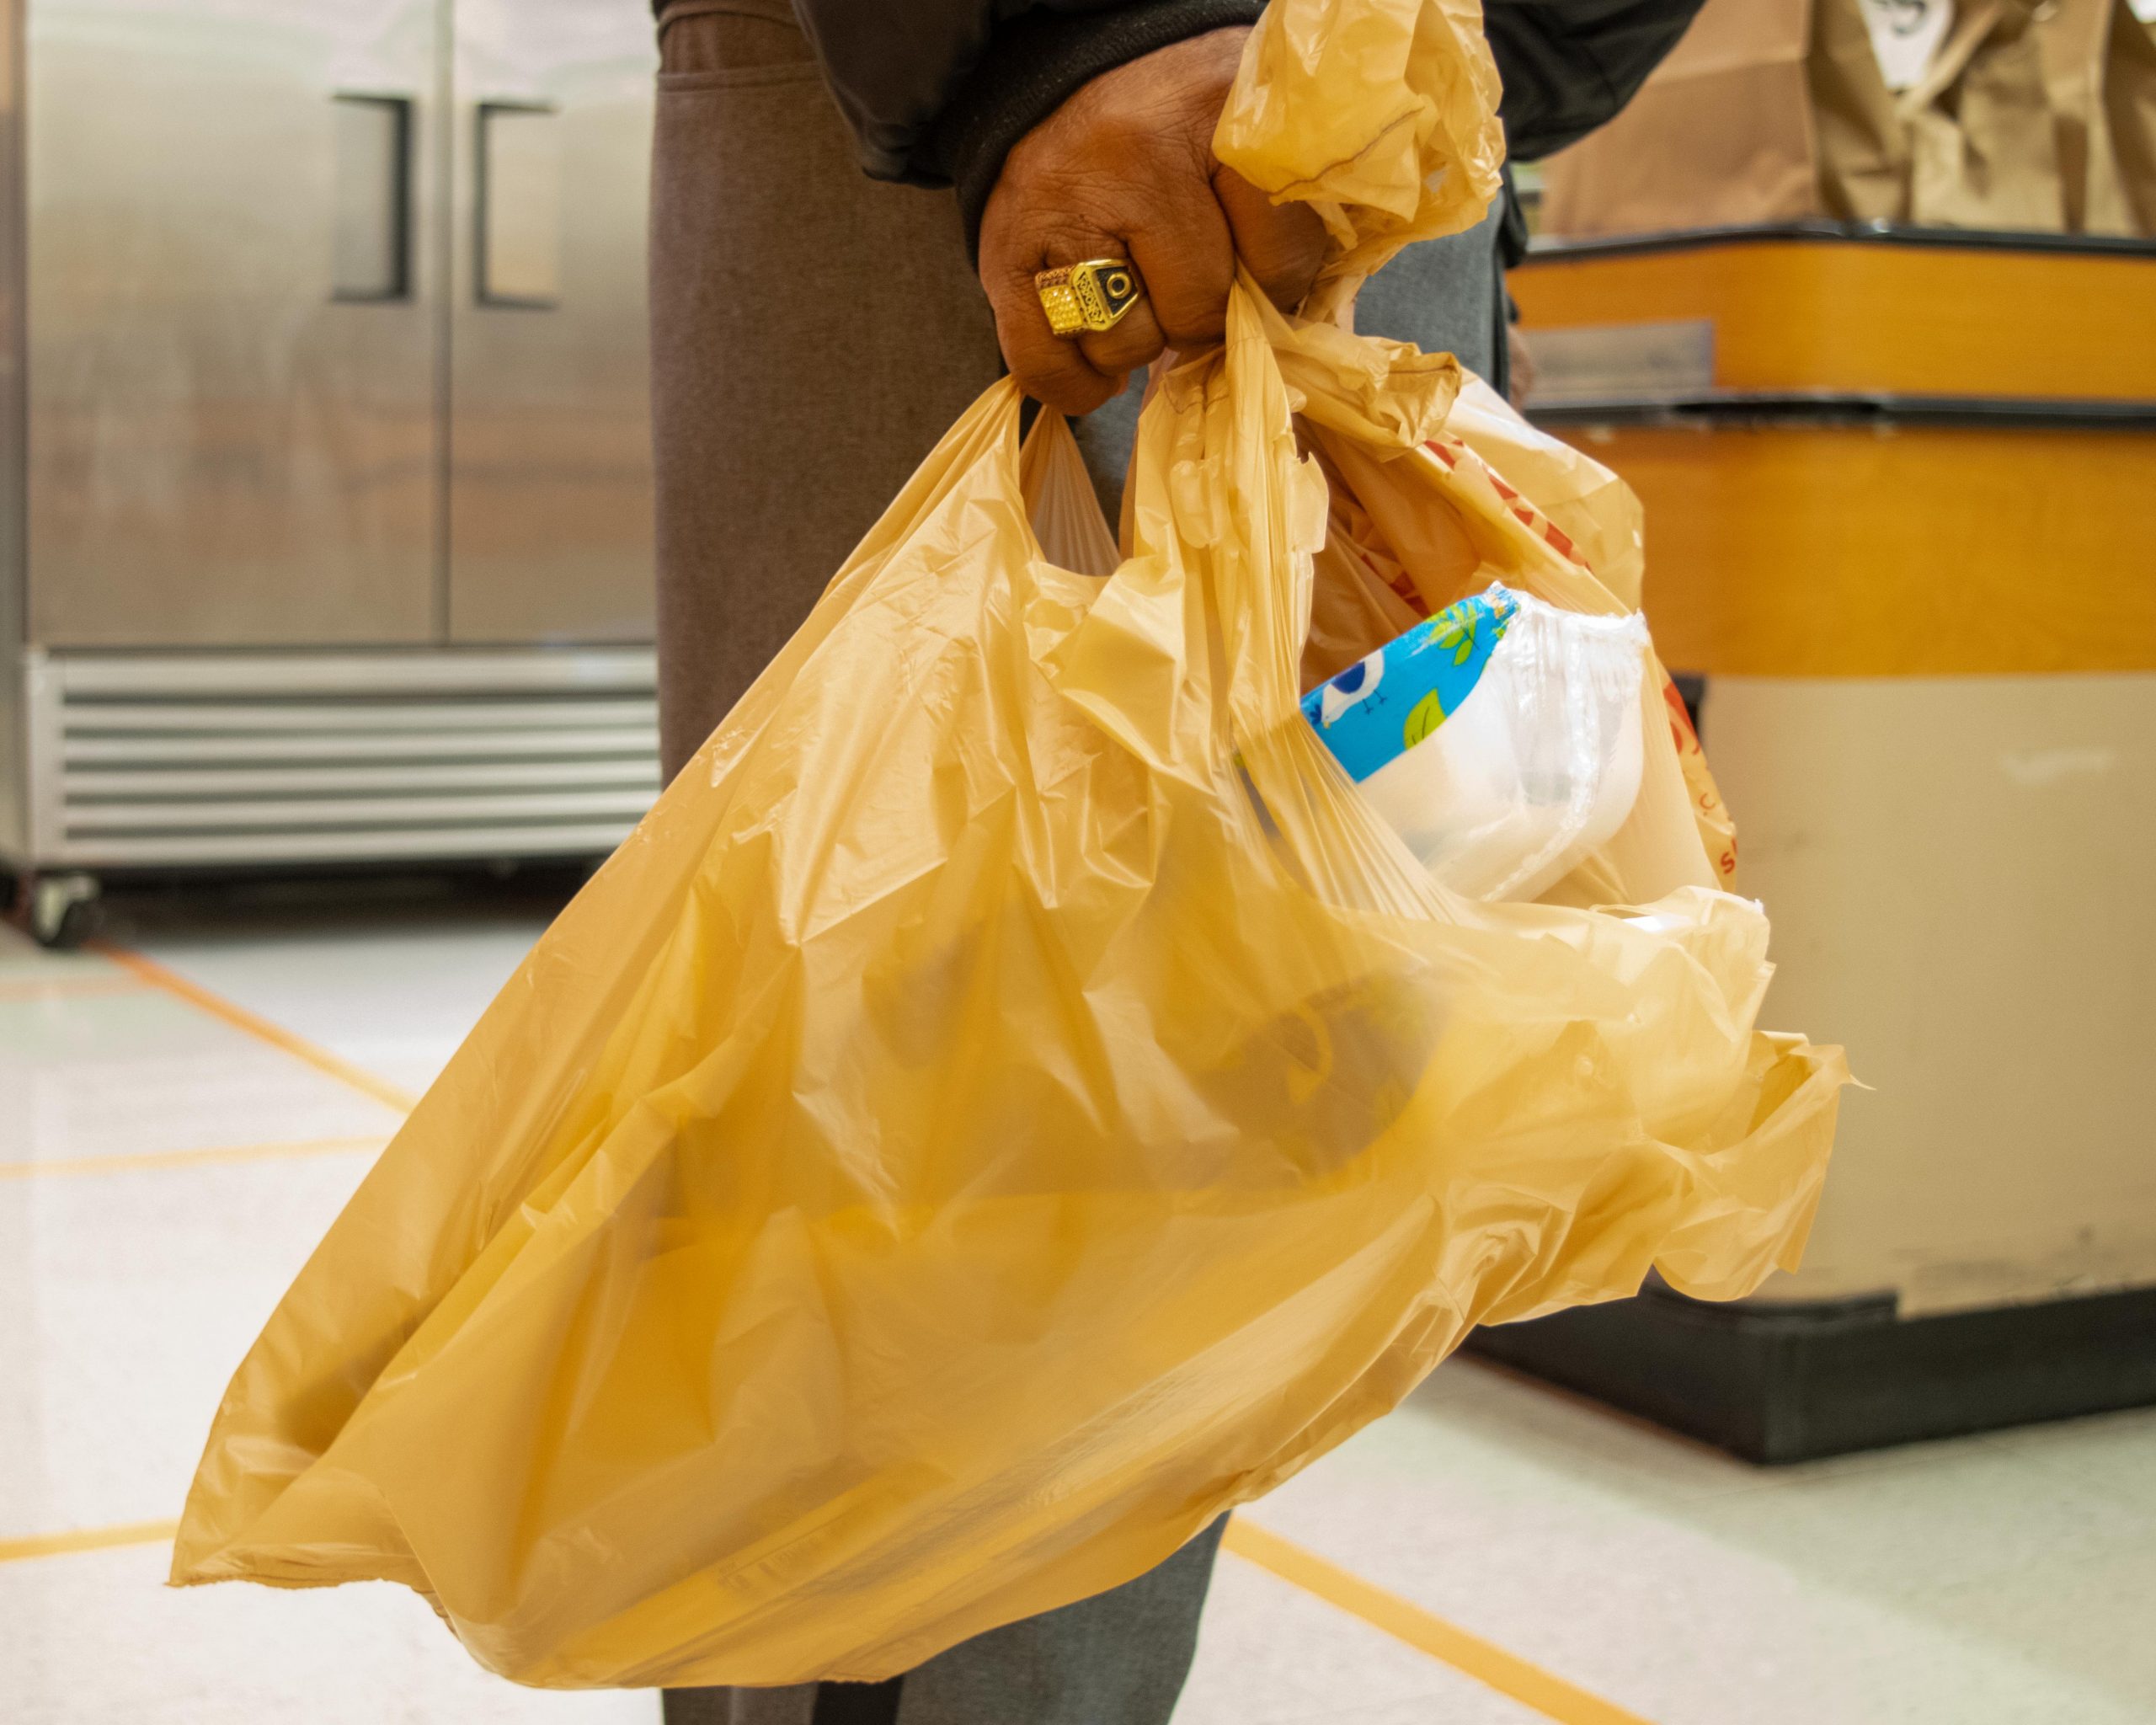 A man holding a plastic carryout bag.